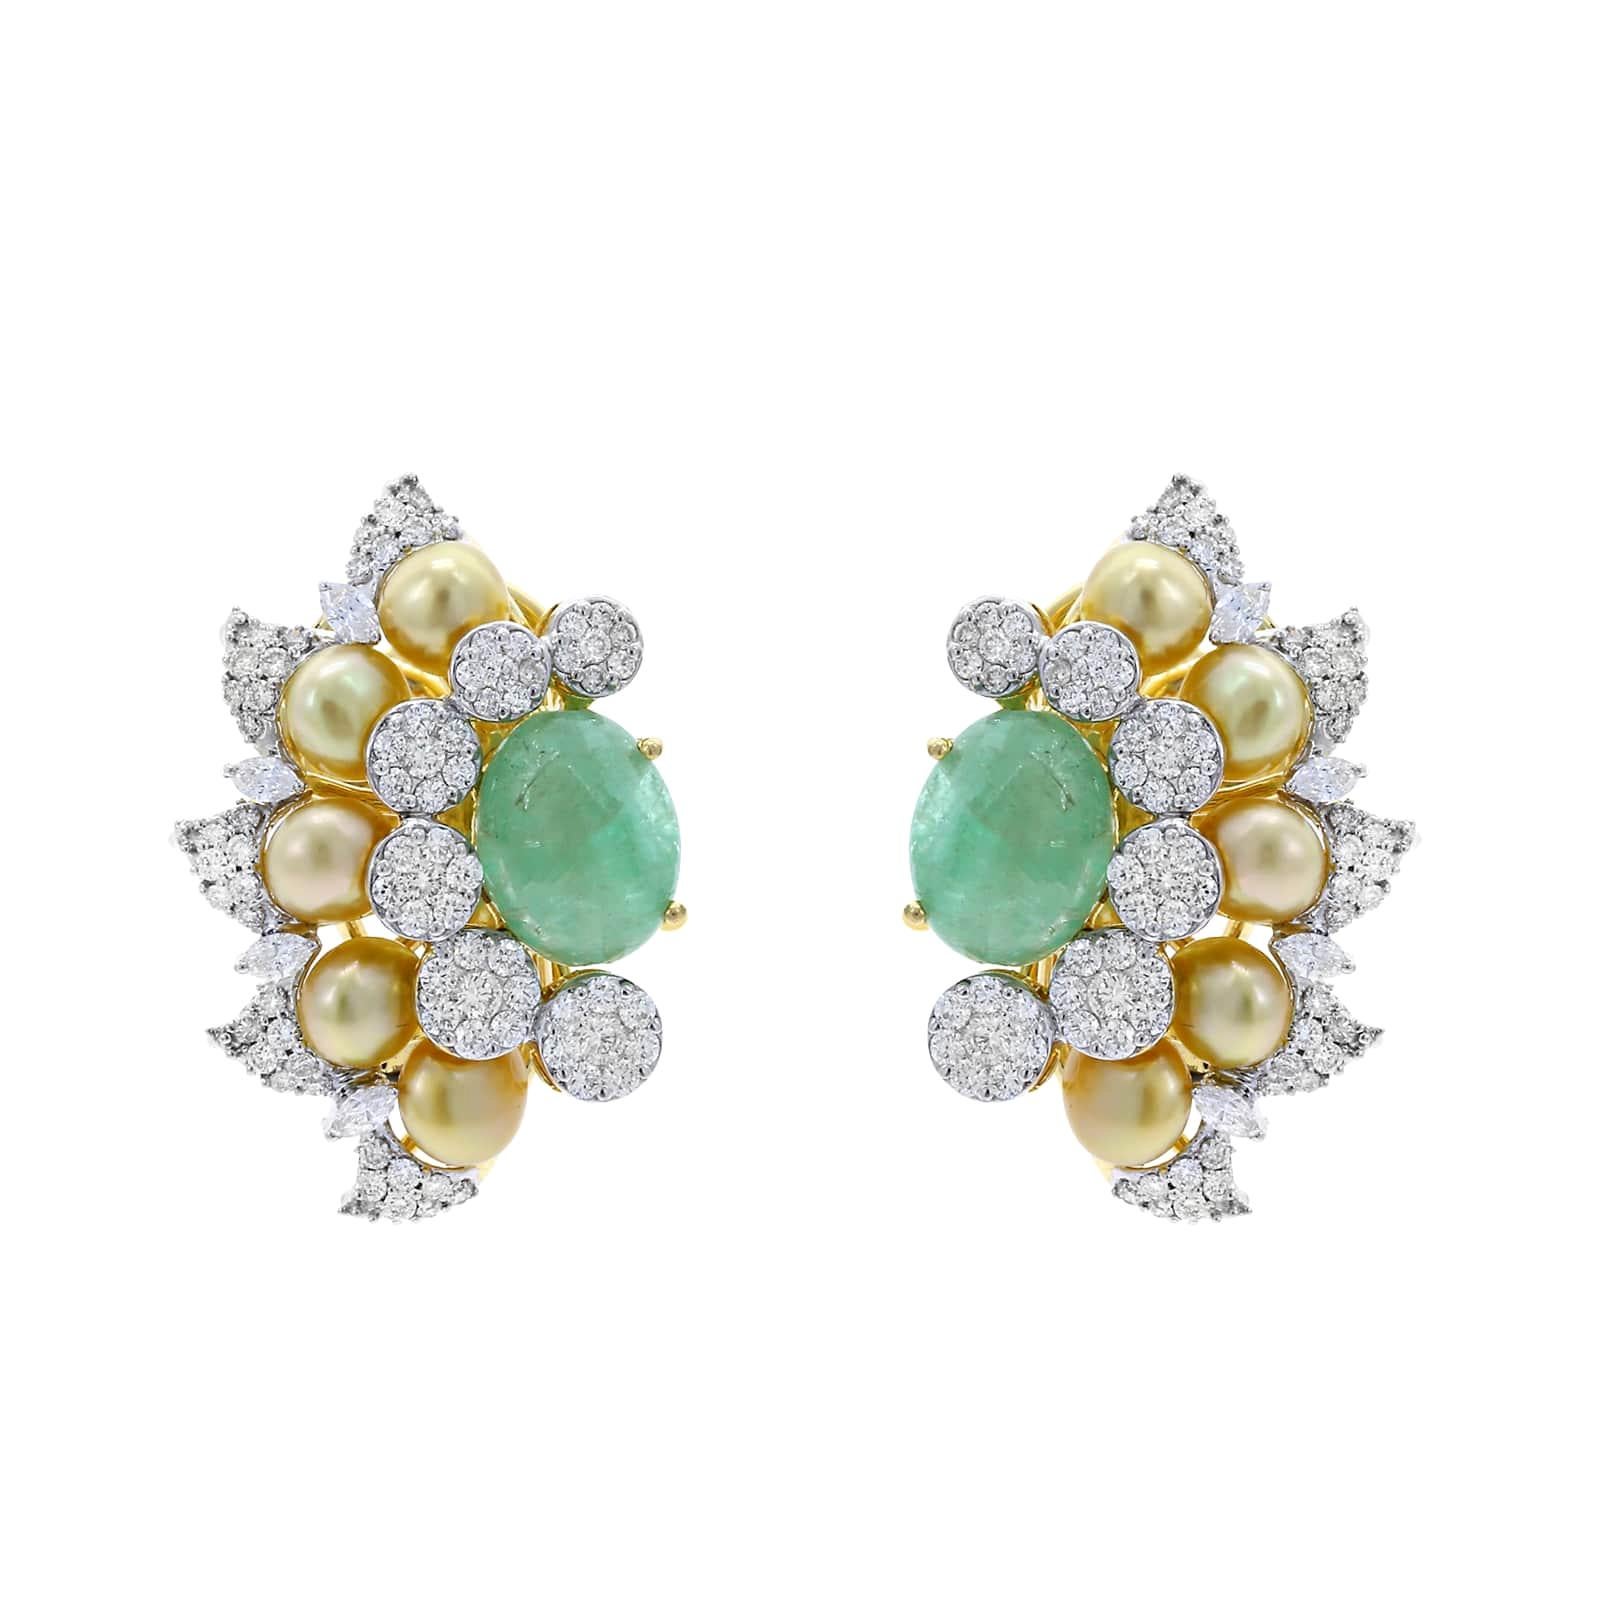 Curved Emerald, Diamond, and Pearl Earrings, 18 Karat Gold